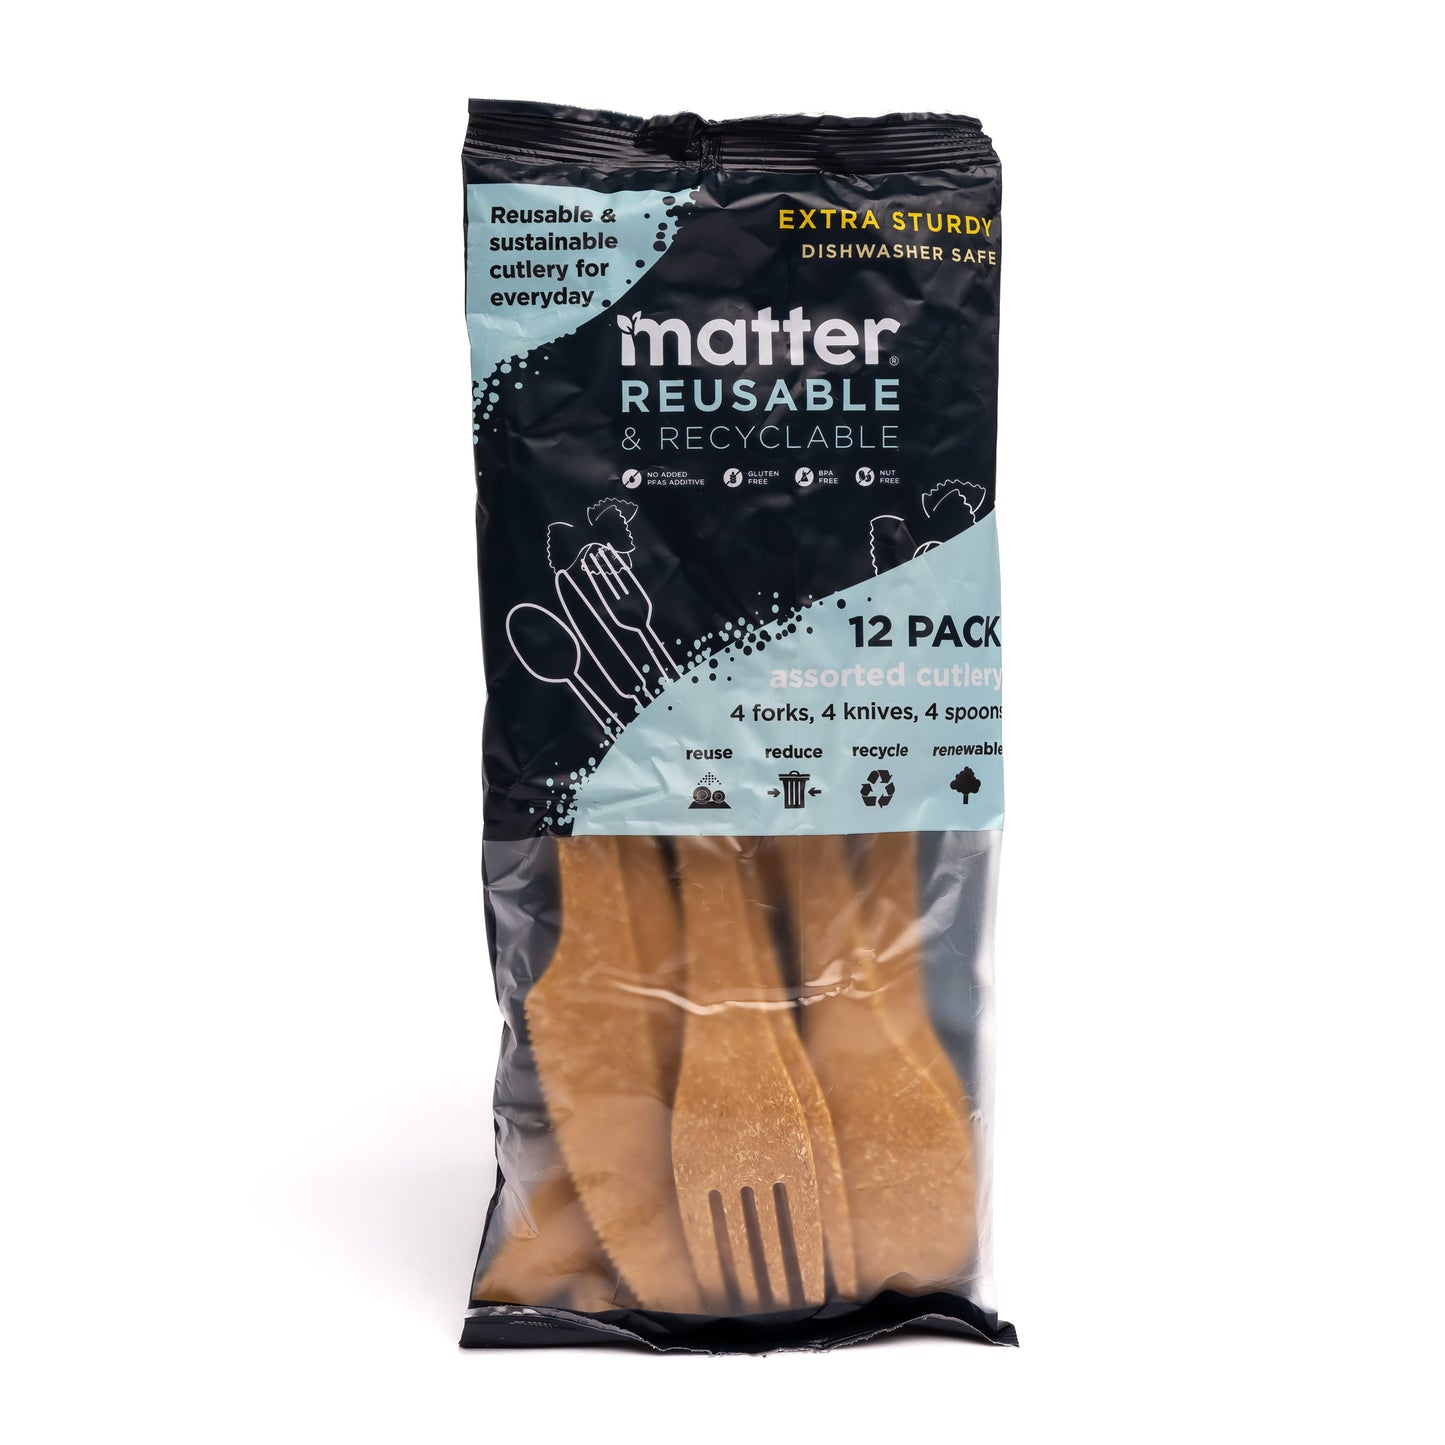 Matter Reusable & Recyclable Cutlery - Assorted Pack 4-Forks/4-Spoons/4-Knives - 12 Count